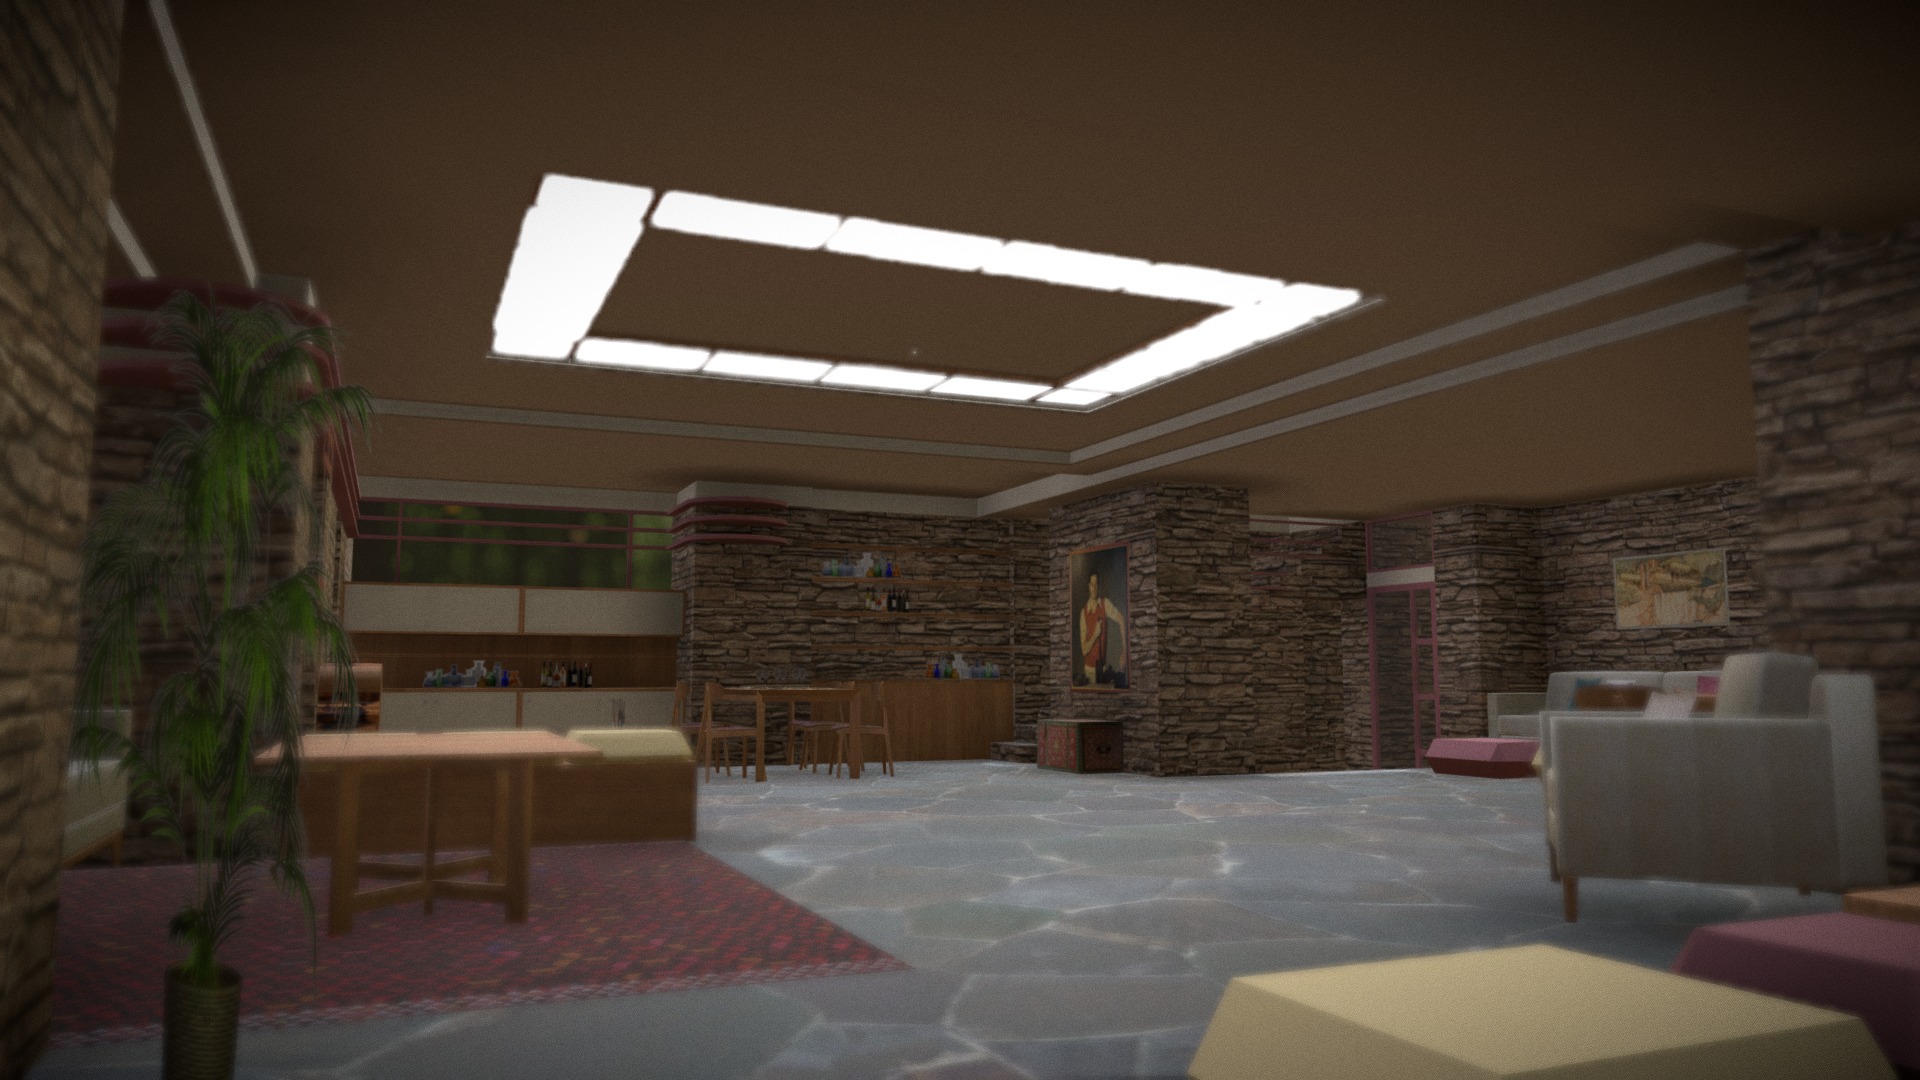 3D model Fallingwater Interior by Frank Lloyd Wright - This is a 3D model of the Fallingwater Interior by Frank Lloyd Wright. The 3D model is about a room with a brick wall and a brick wall with a table and chairs.